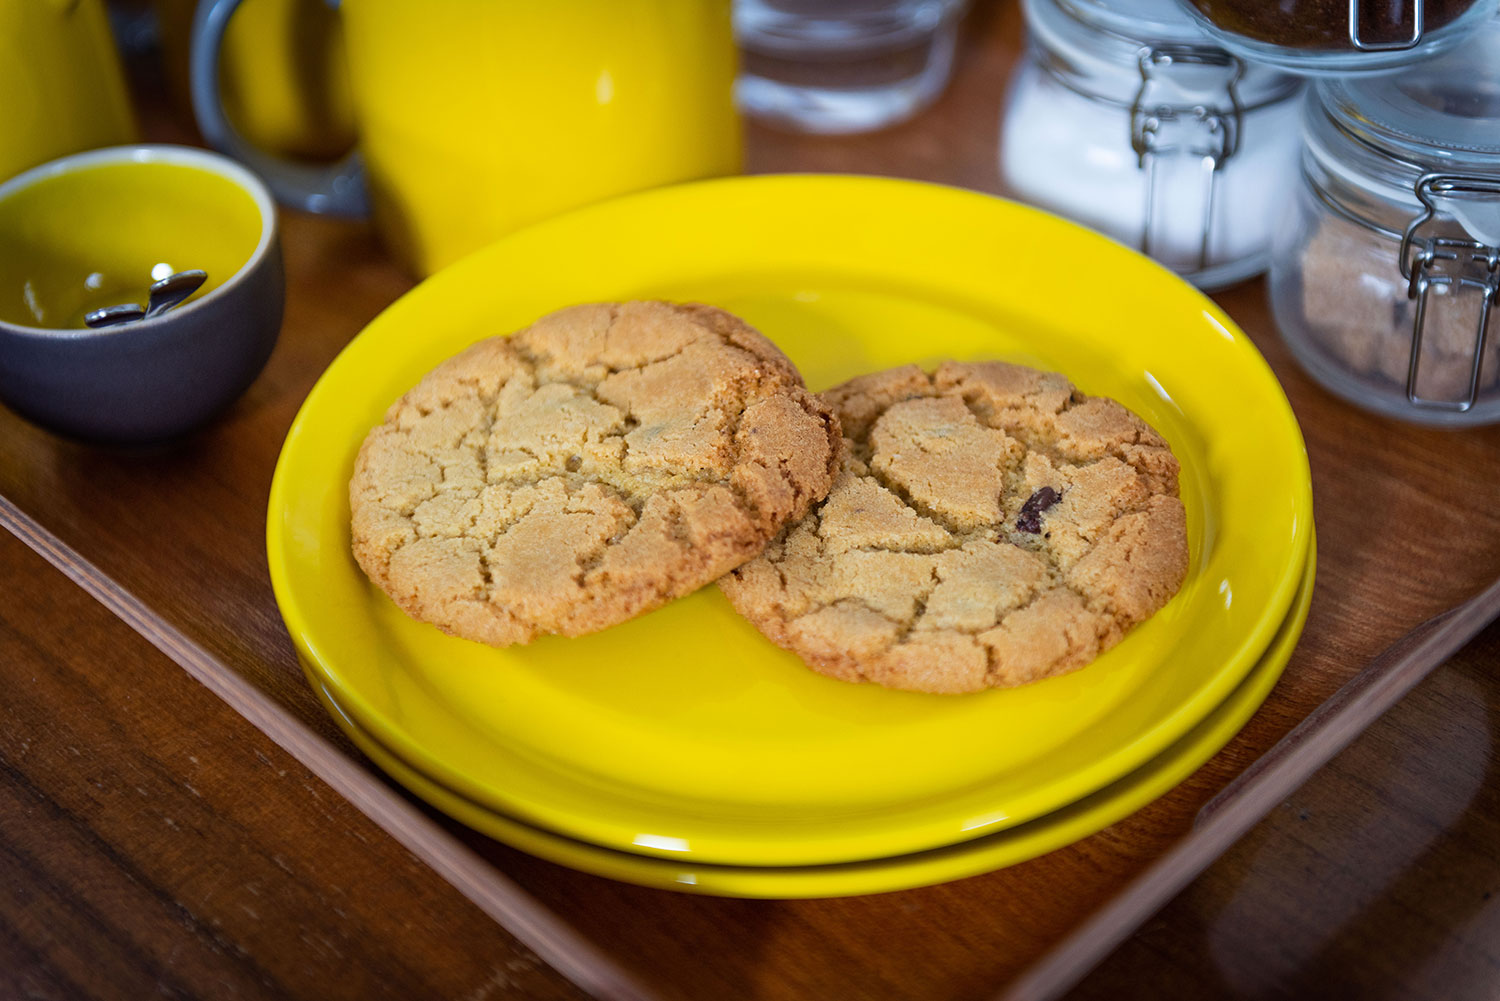 Chocoate chip cookies on a plate